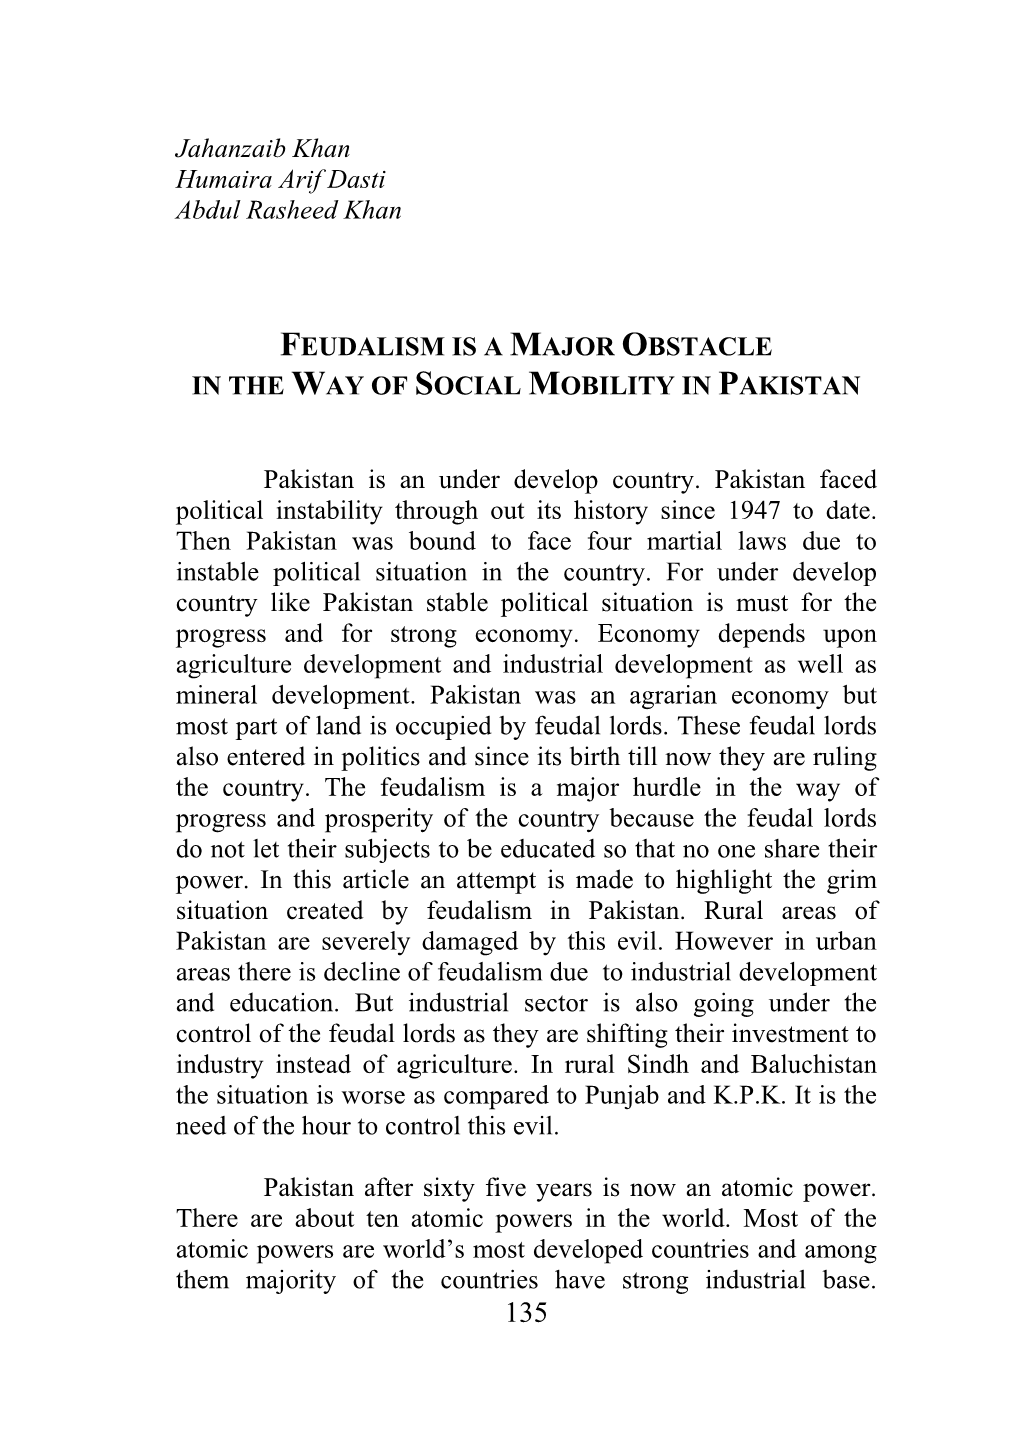 Feudalism Is a Major Obstacle in the Way of Social Mobility in Pakistan